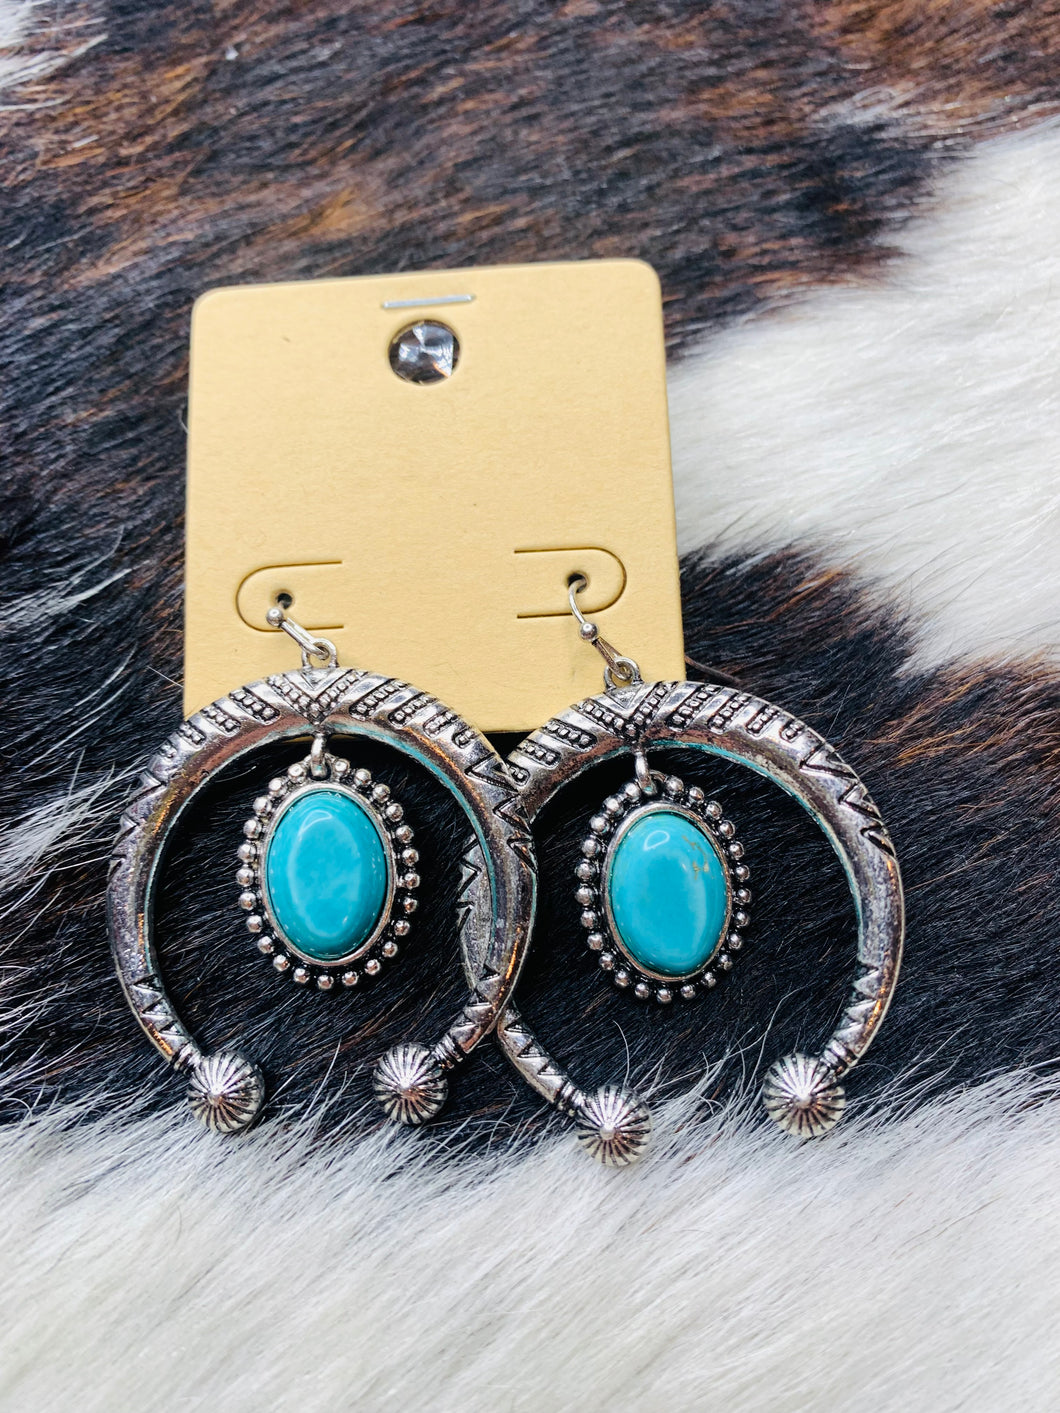 Turquoise and silver squash earrings